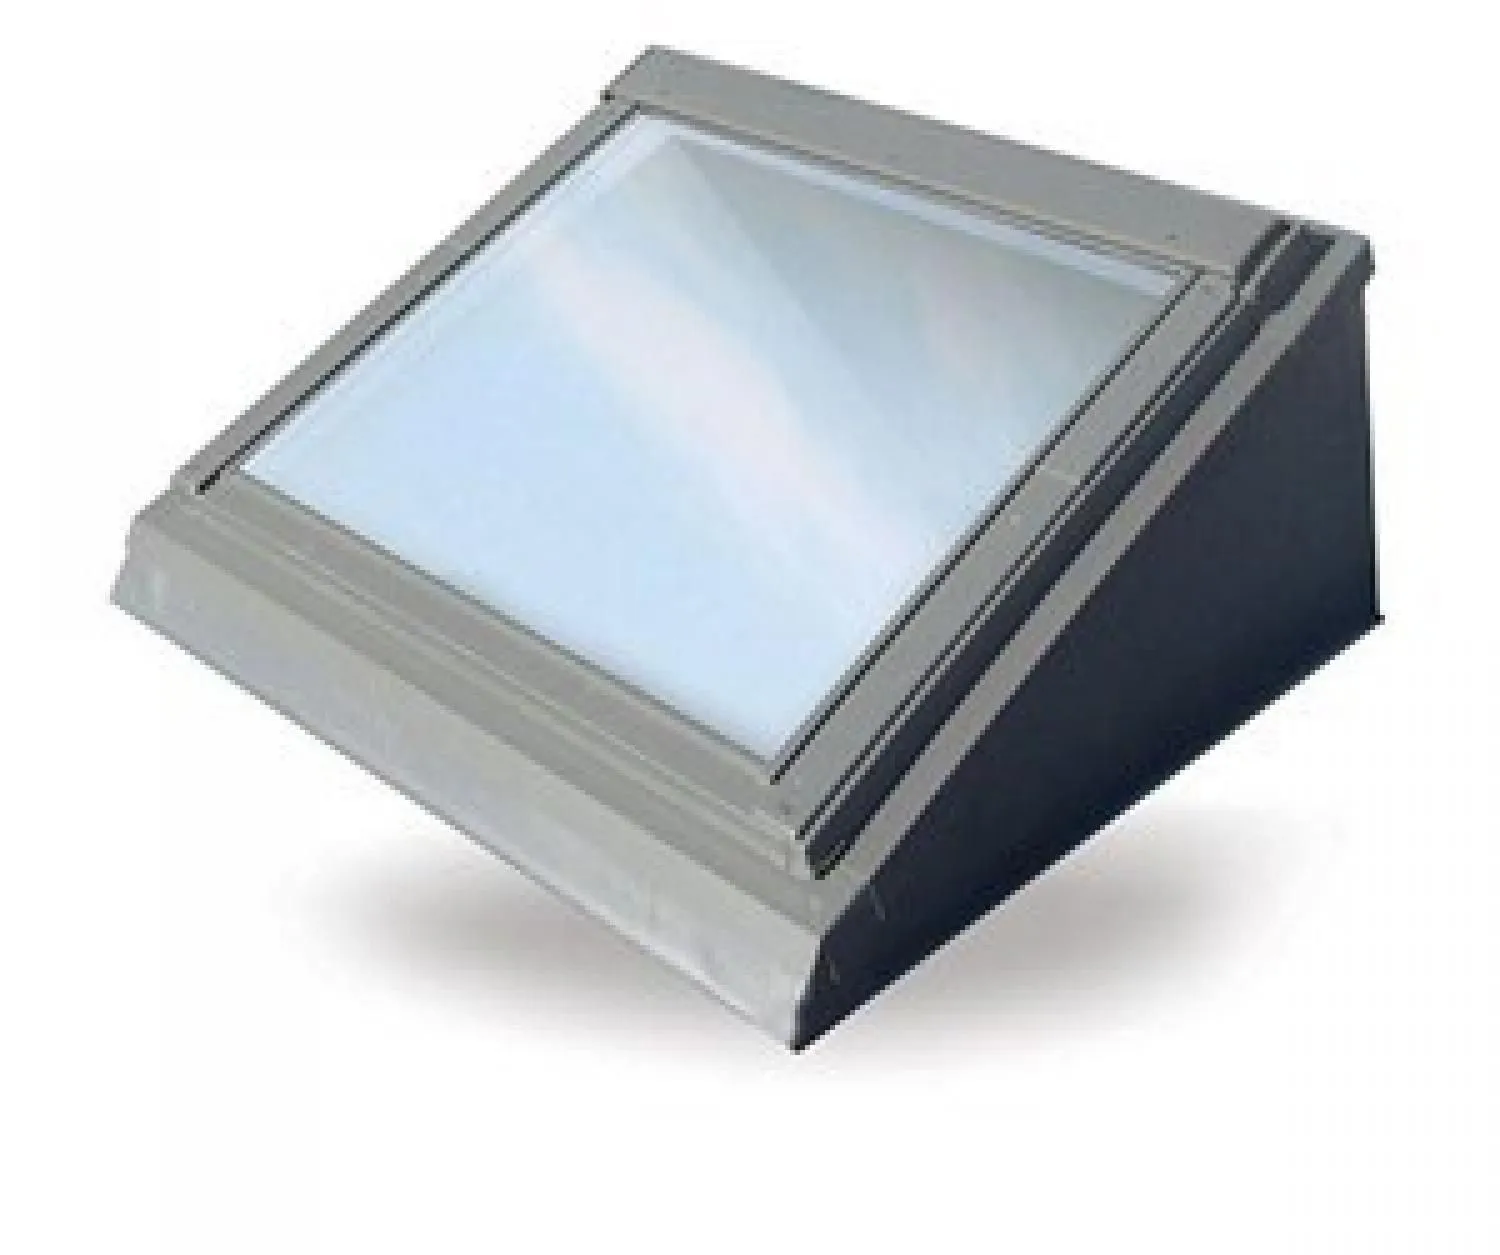 Keylite Flat Roof System flashing for 1 window 660 x 1180mm  FRSF03